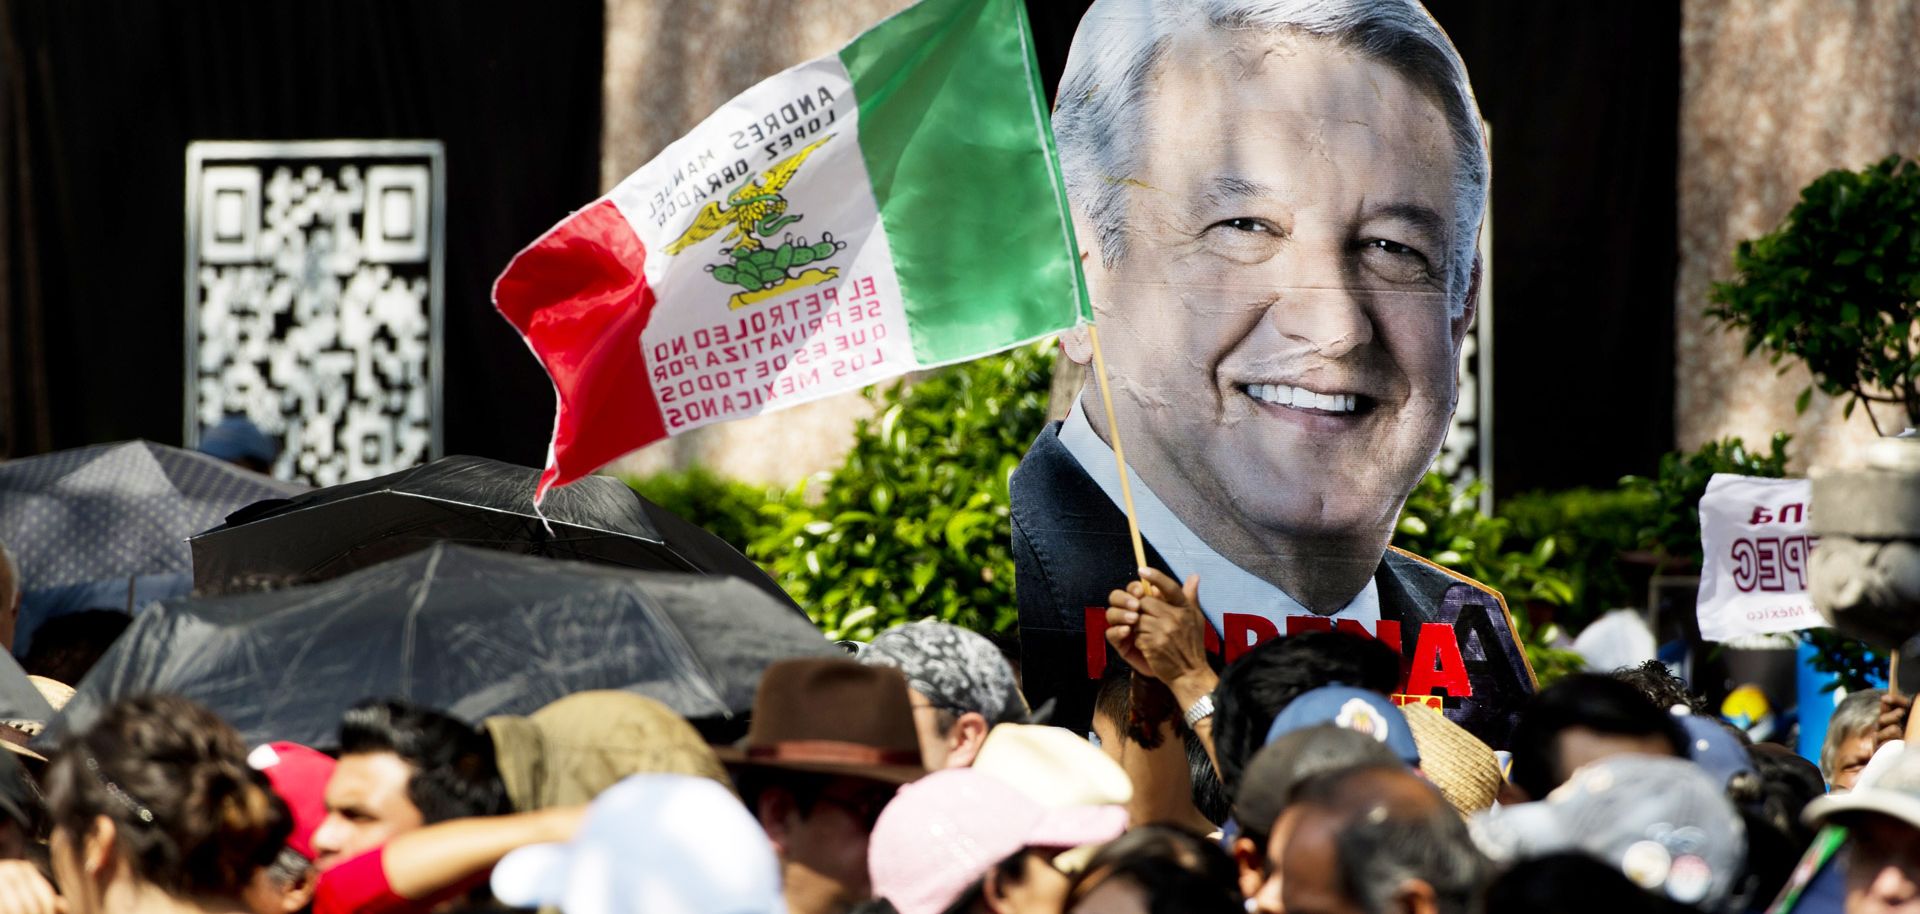 Mexico's Energy Reform Will Remain the Law of the Land